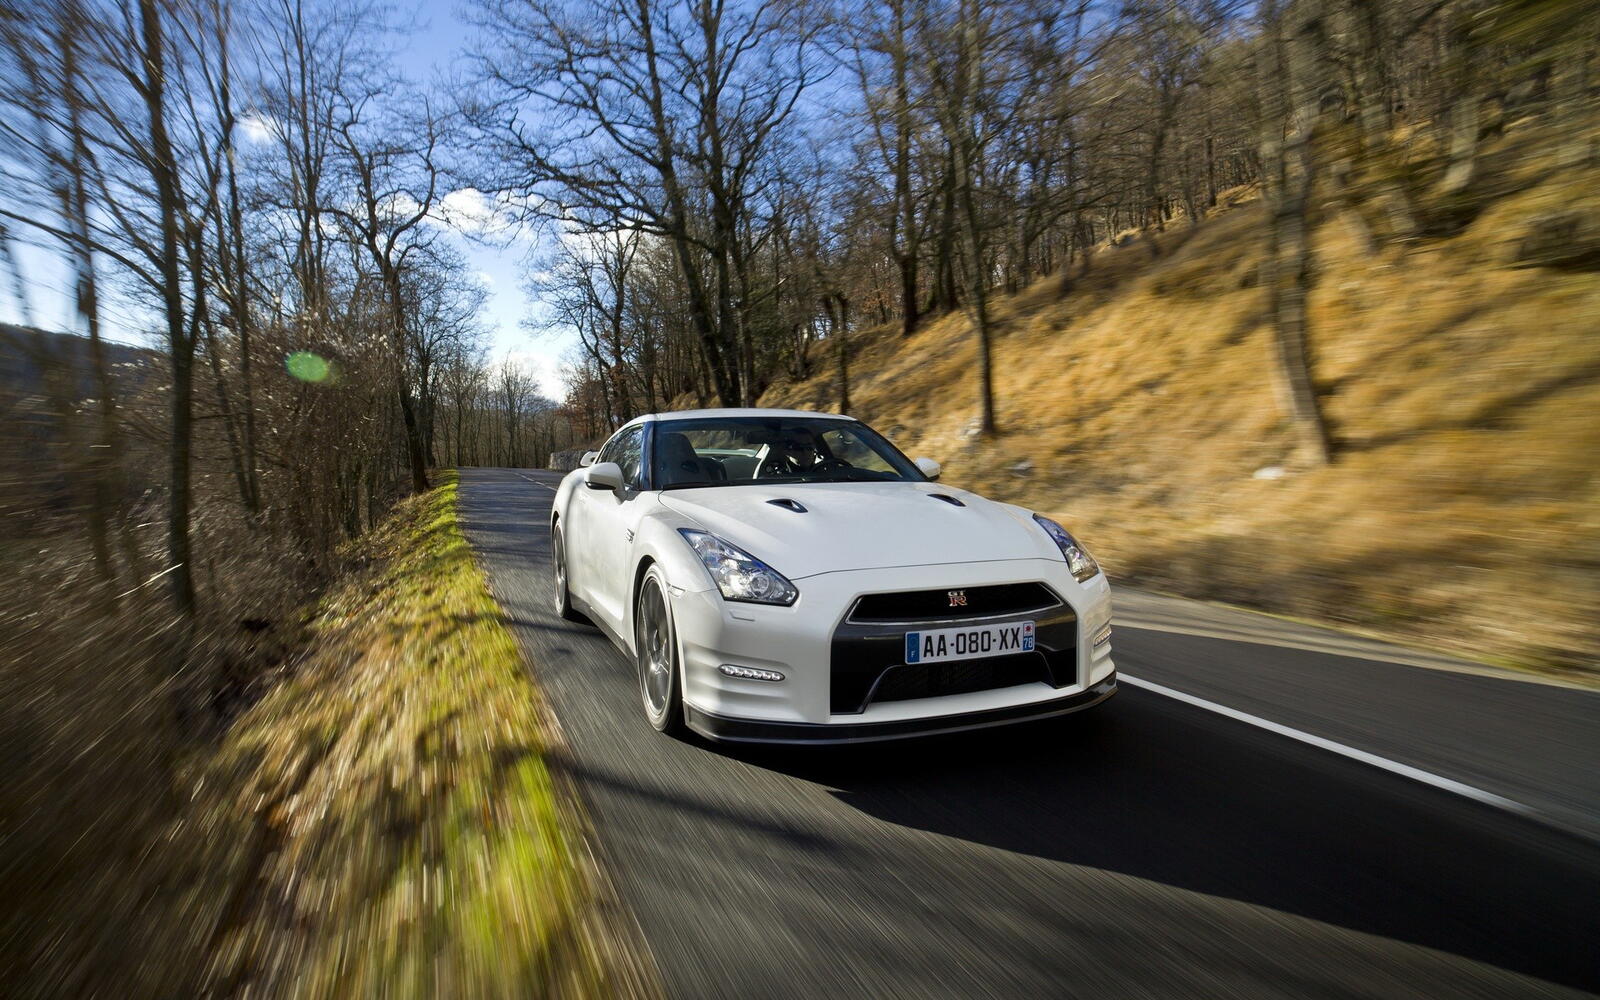 Wallpapers nissan gt-r white on the desktop